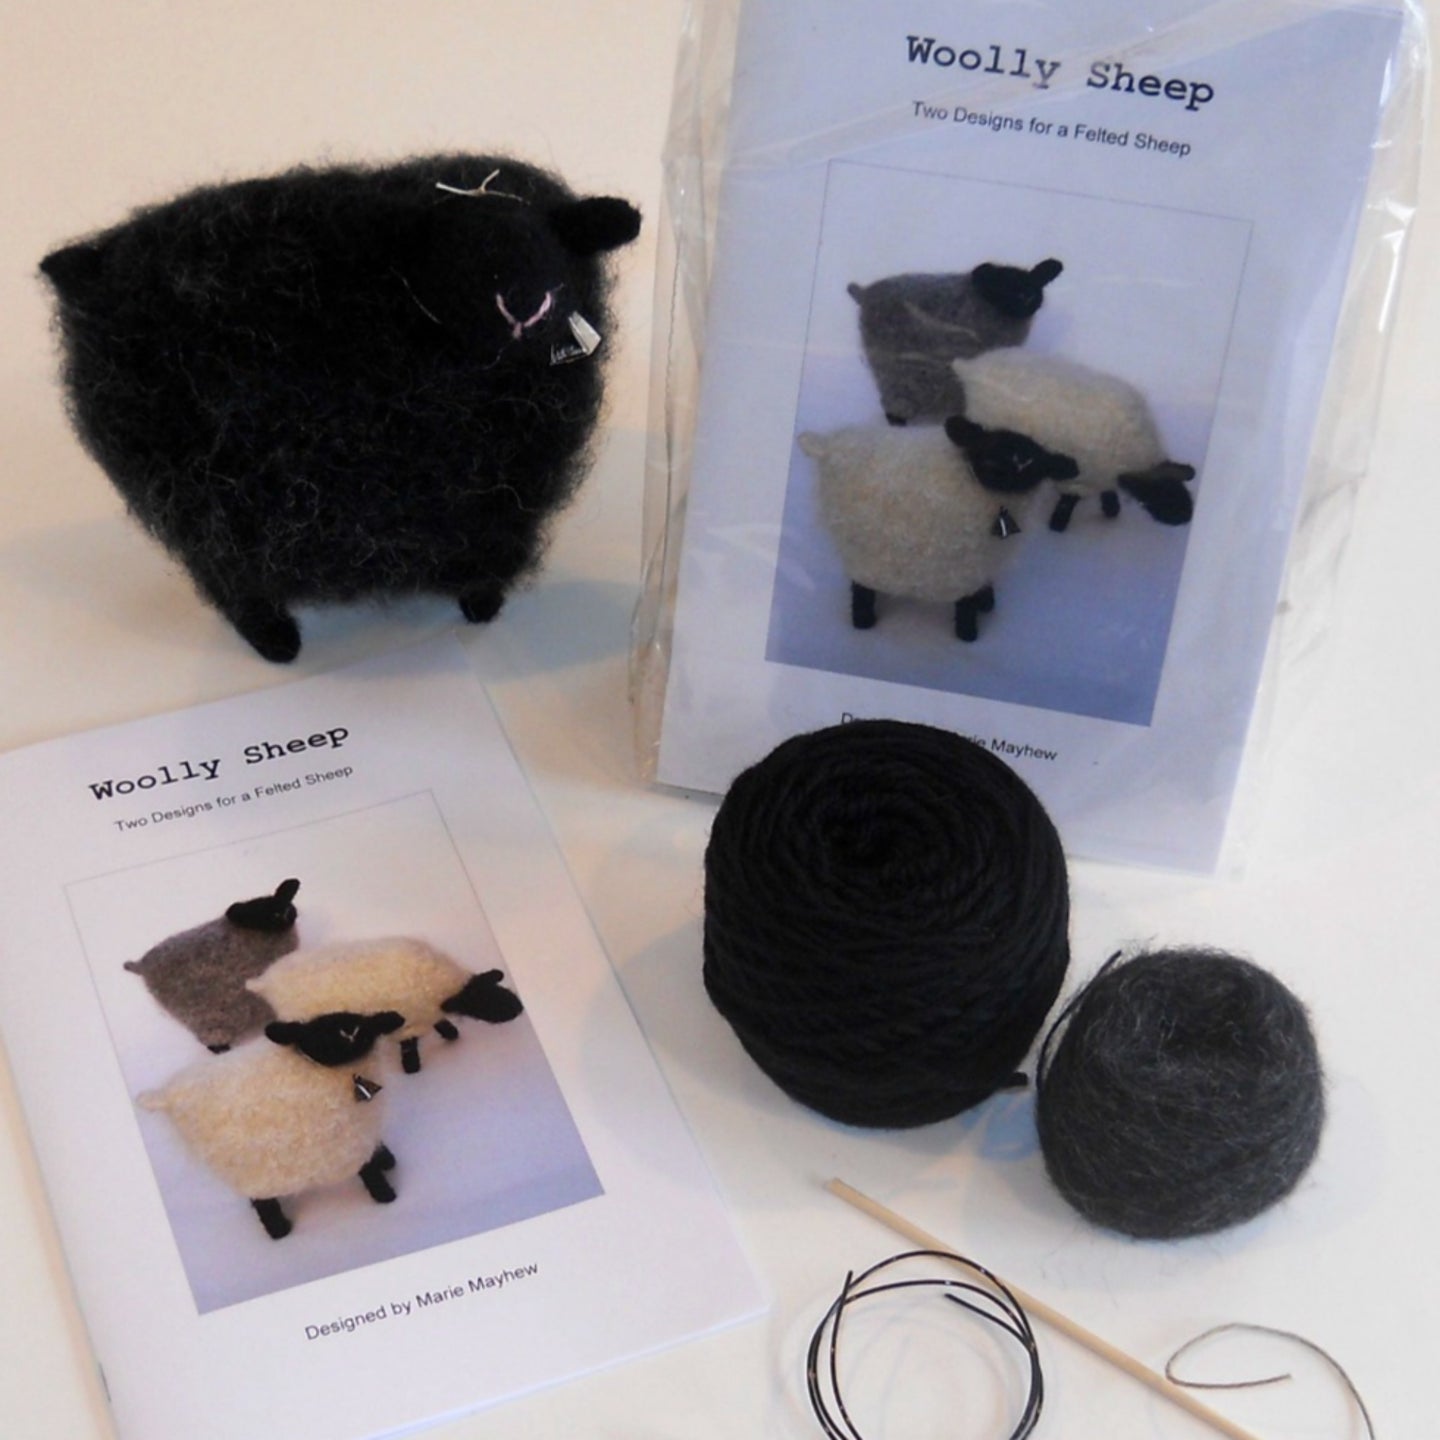 marie mayhew's woolly sheep pattern and kit